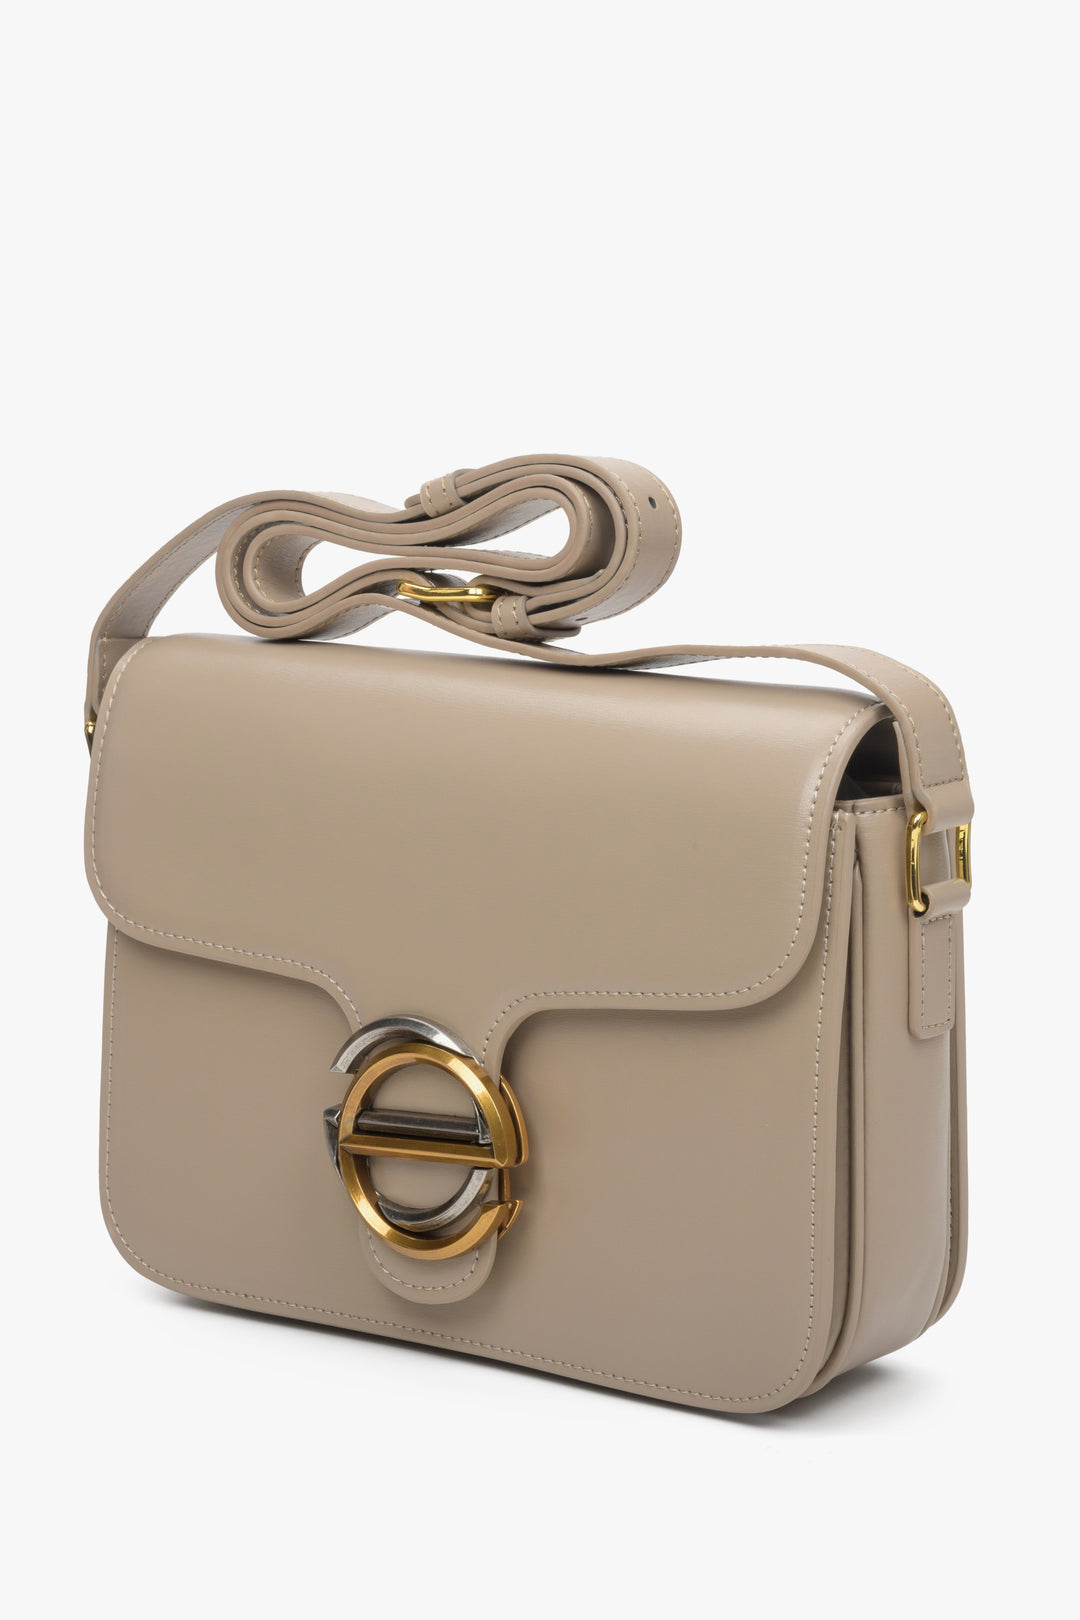 Women's small grey and beige leather bag by Estro.